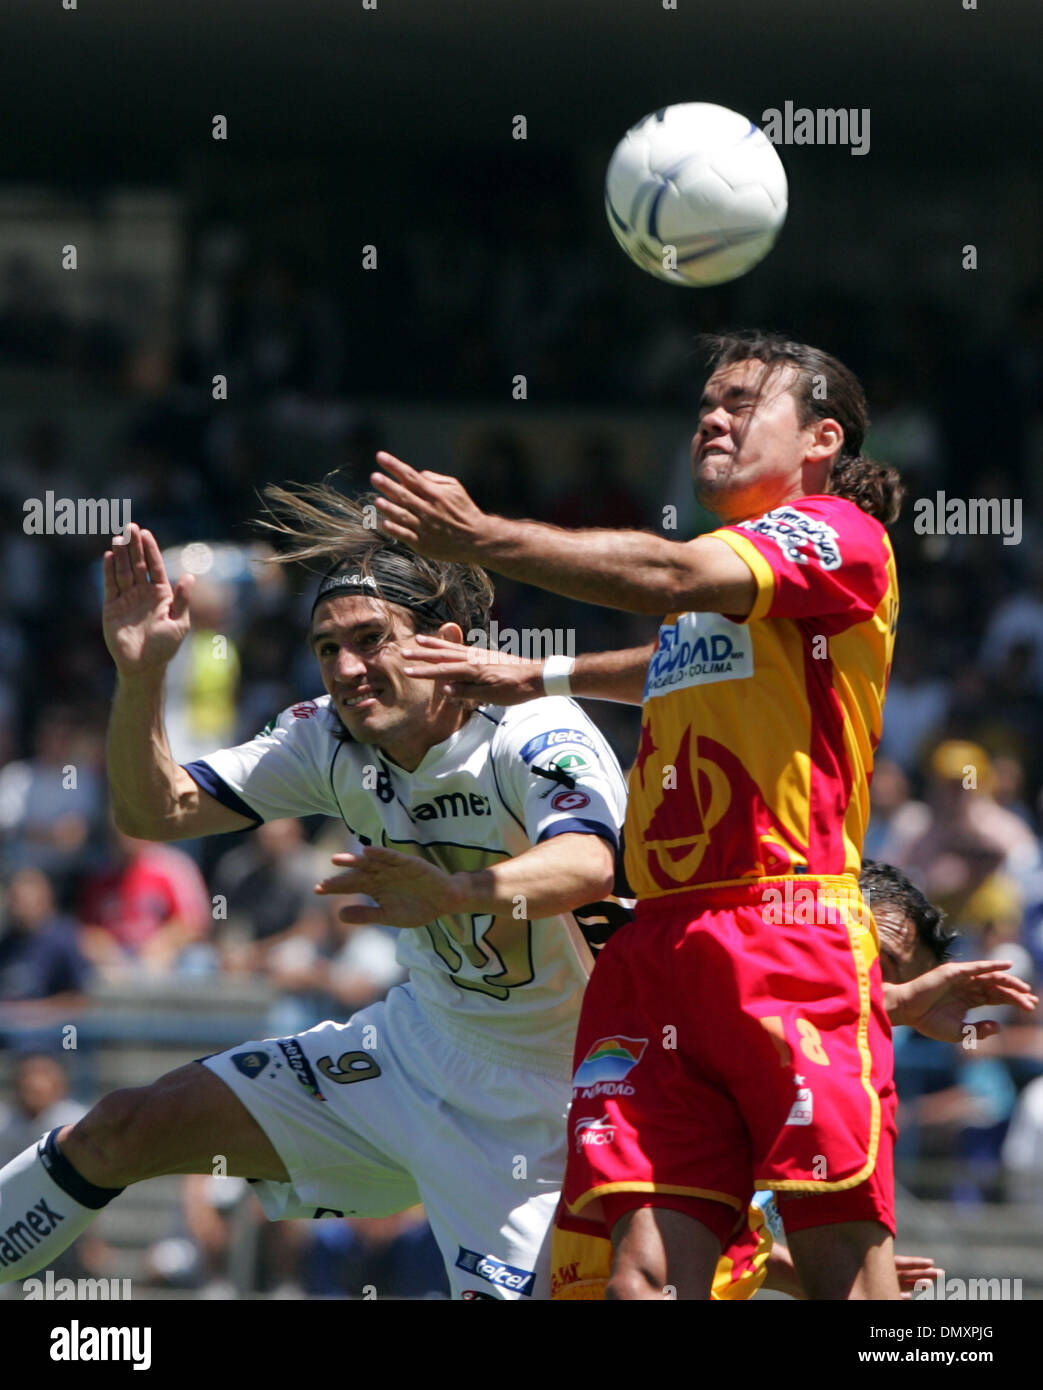 Mar 19, 2006; Mexico City, Mexico; UNAM Pumas BRUNO MARIONI fights for the ball with UAG Tecos defender Miguel Hernandez during their soccer match at the University Stadium in Mexico City. UAG Tecos won 1-0 against the UNAM Pumas. Mandatory Credit: Photo by Javier Rodriguez/ZUMA Press. (©) Copyright 2006 by Javier Rodriguez Stock Photo